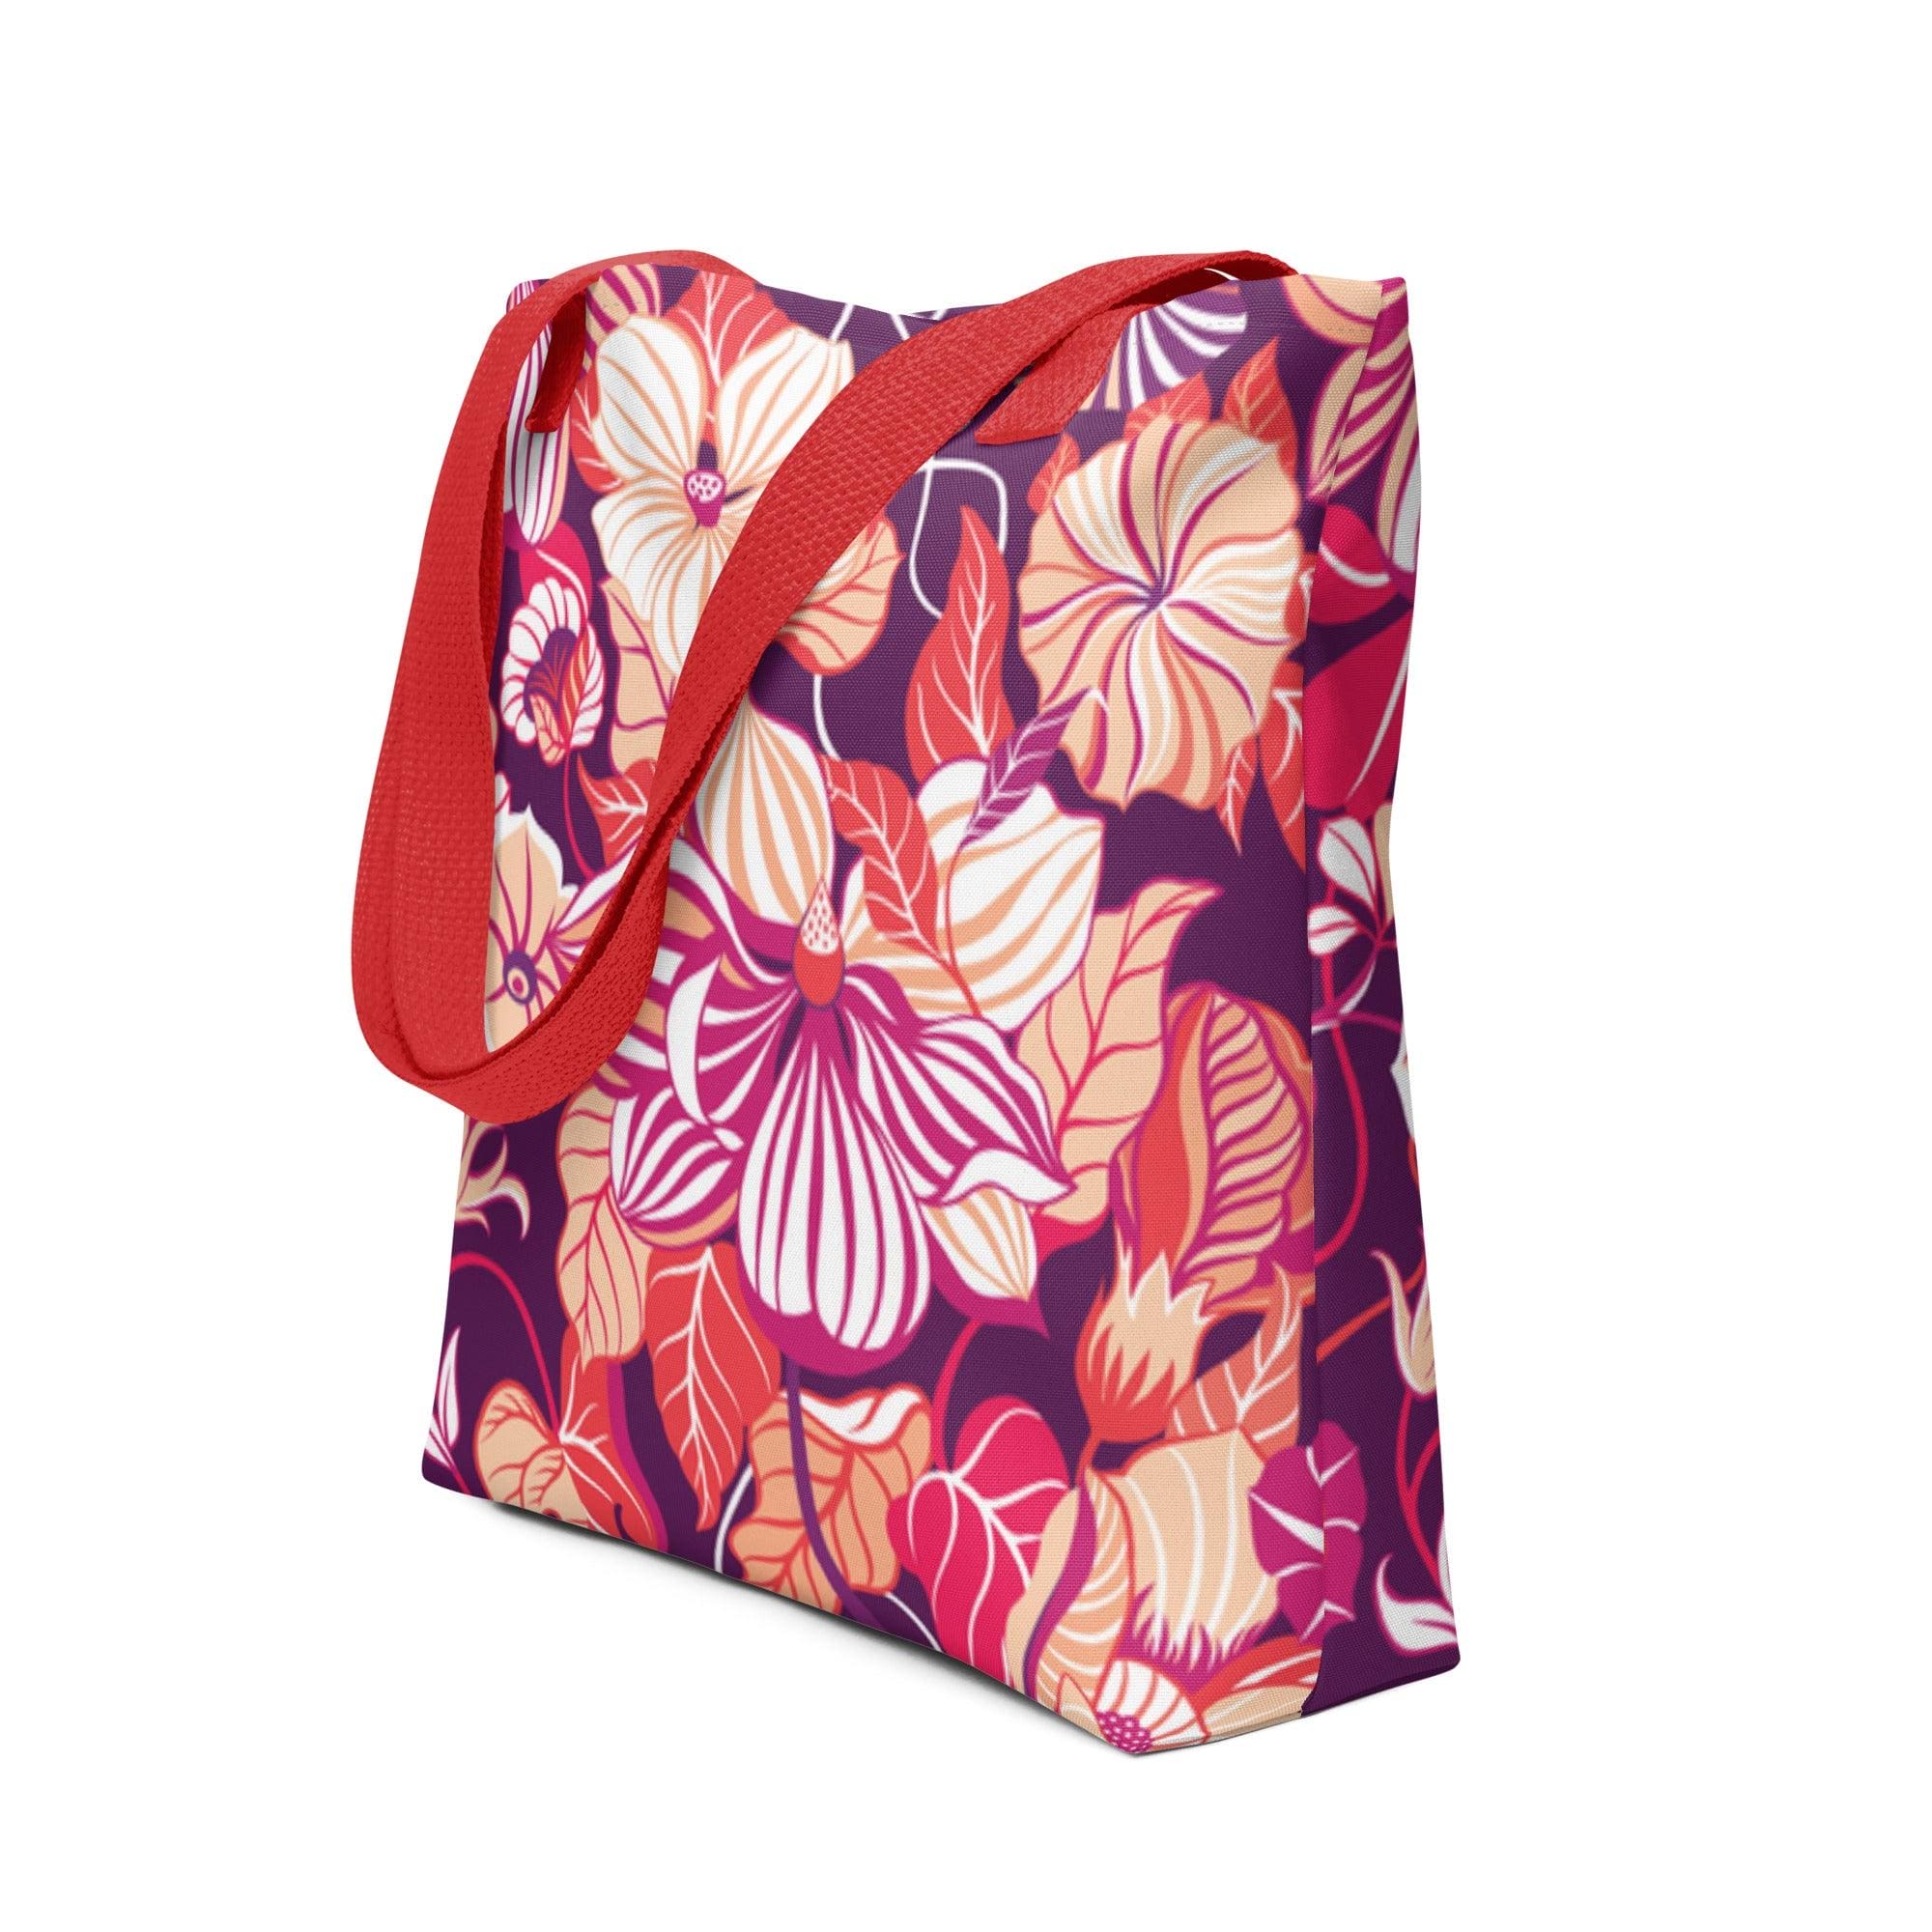 Blossoming Inspiration: Twin Dollar's Inspirational Flower Design Tote Bag - TWIN DOLLAR